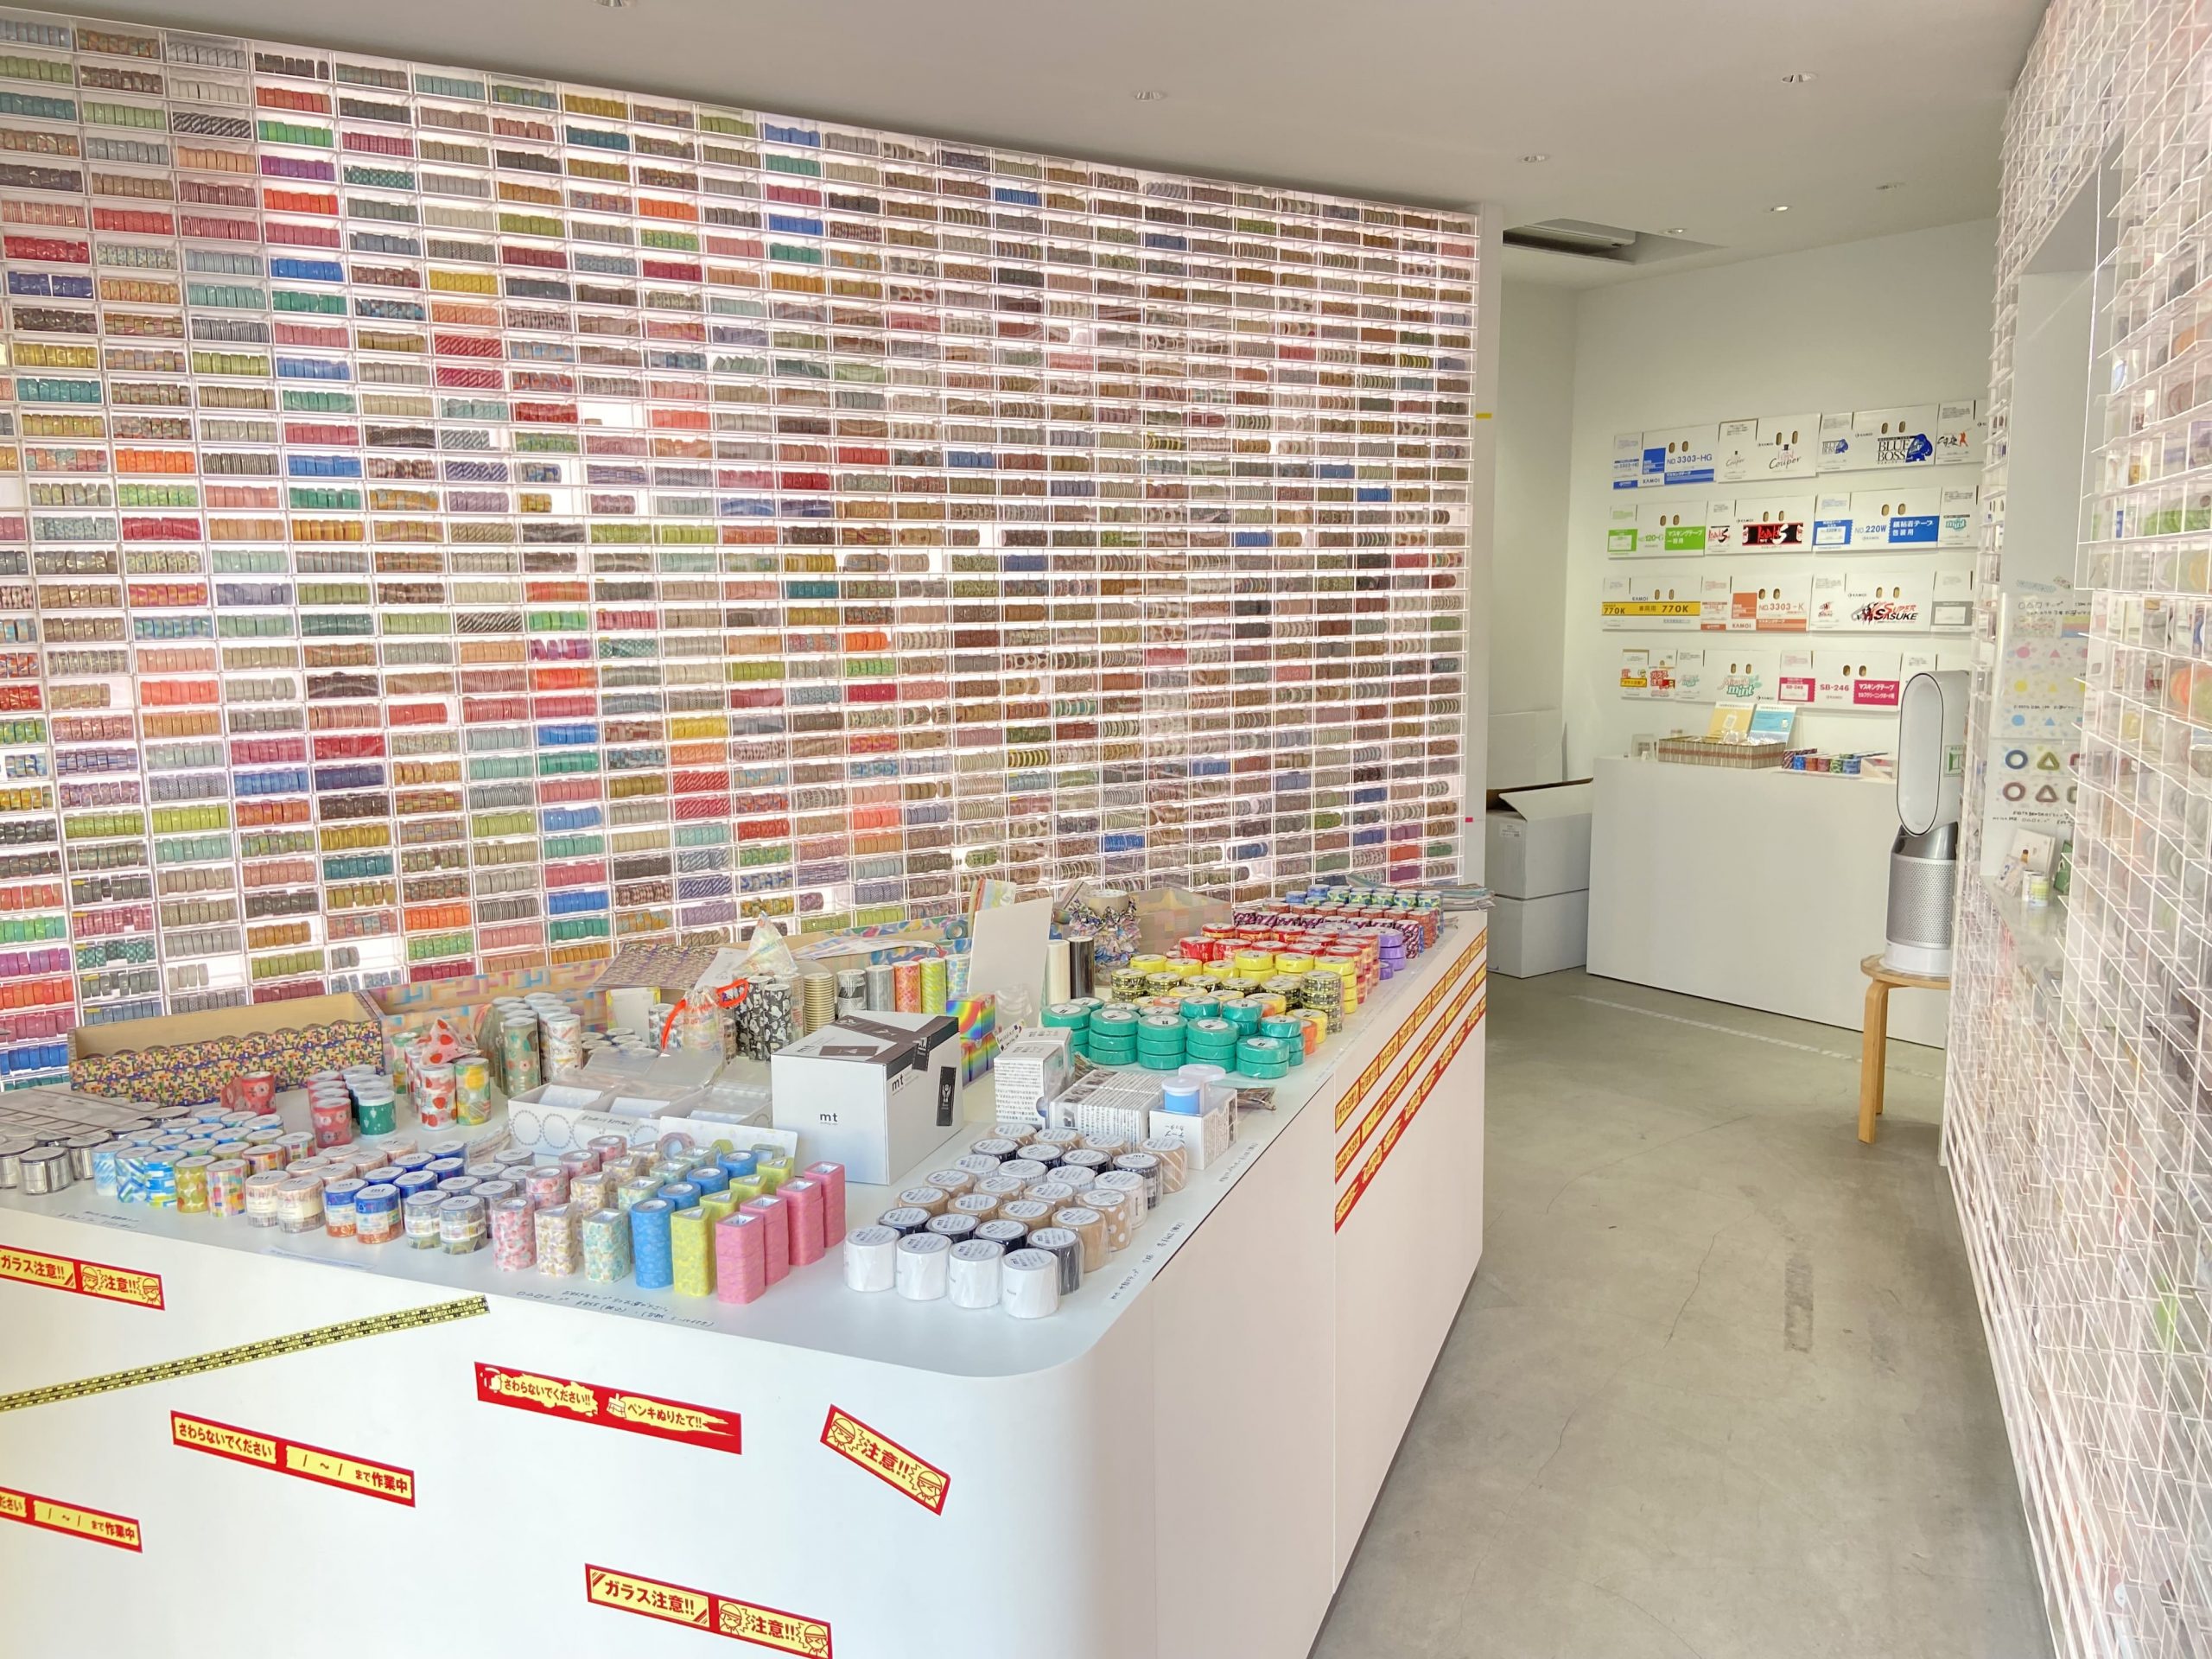 mt washi tape store osaka review best washi tape shops in japan stationery must visit planner supplies japanese recommended